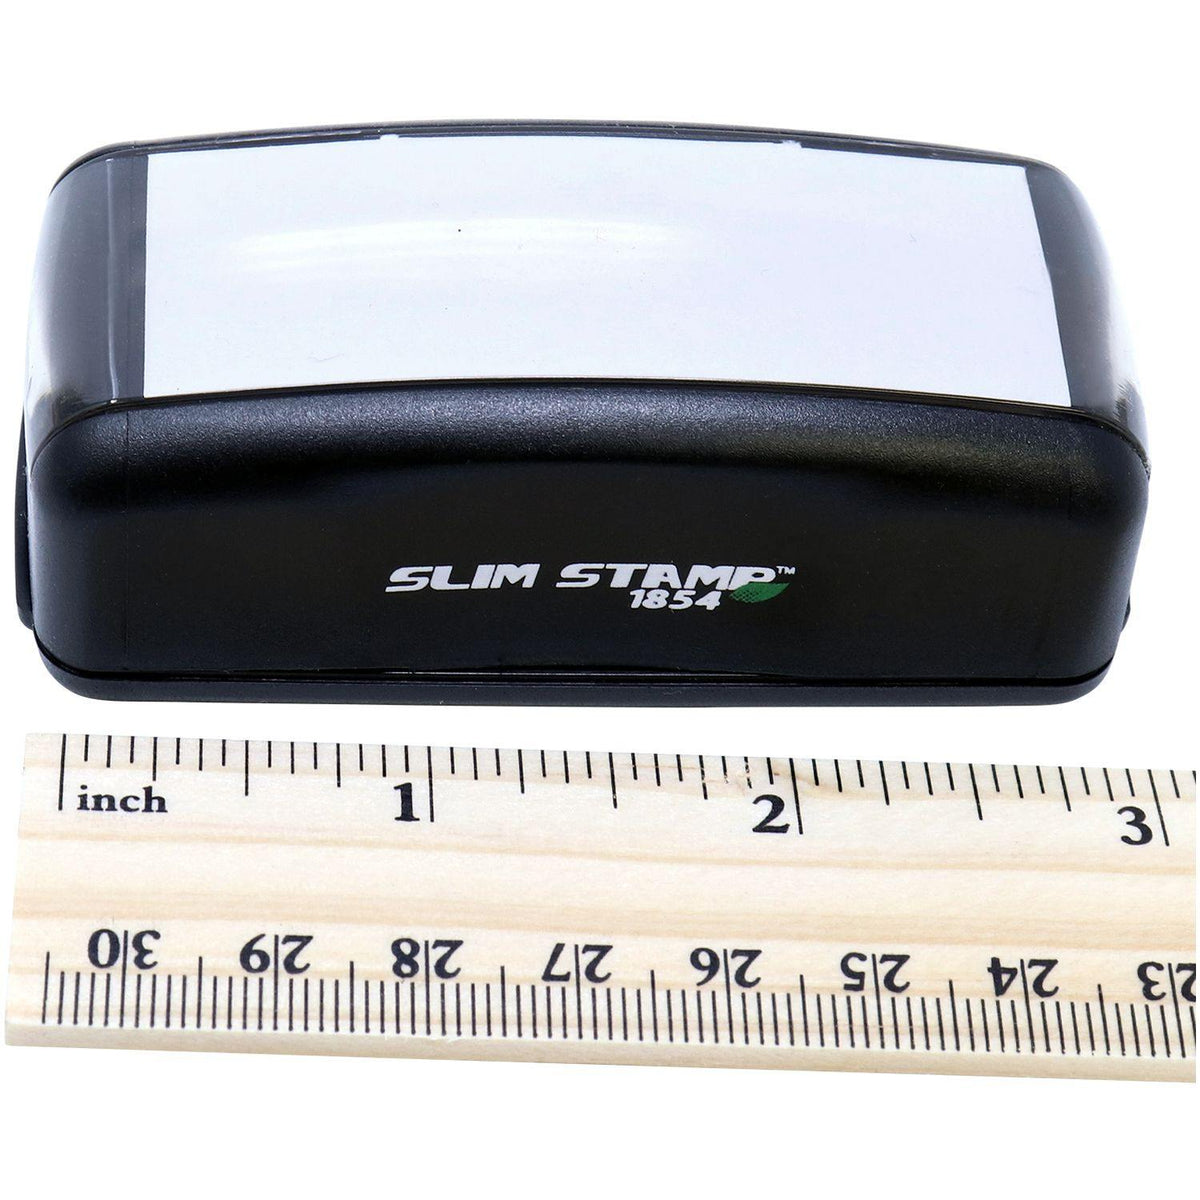 Measurement Large Pre-Inked Tripilicado Stamp with Ruler